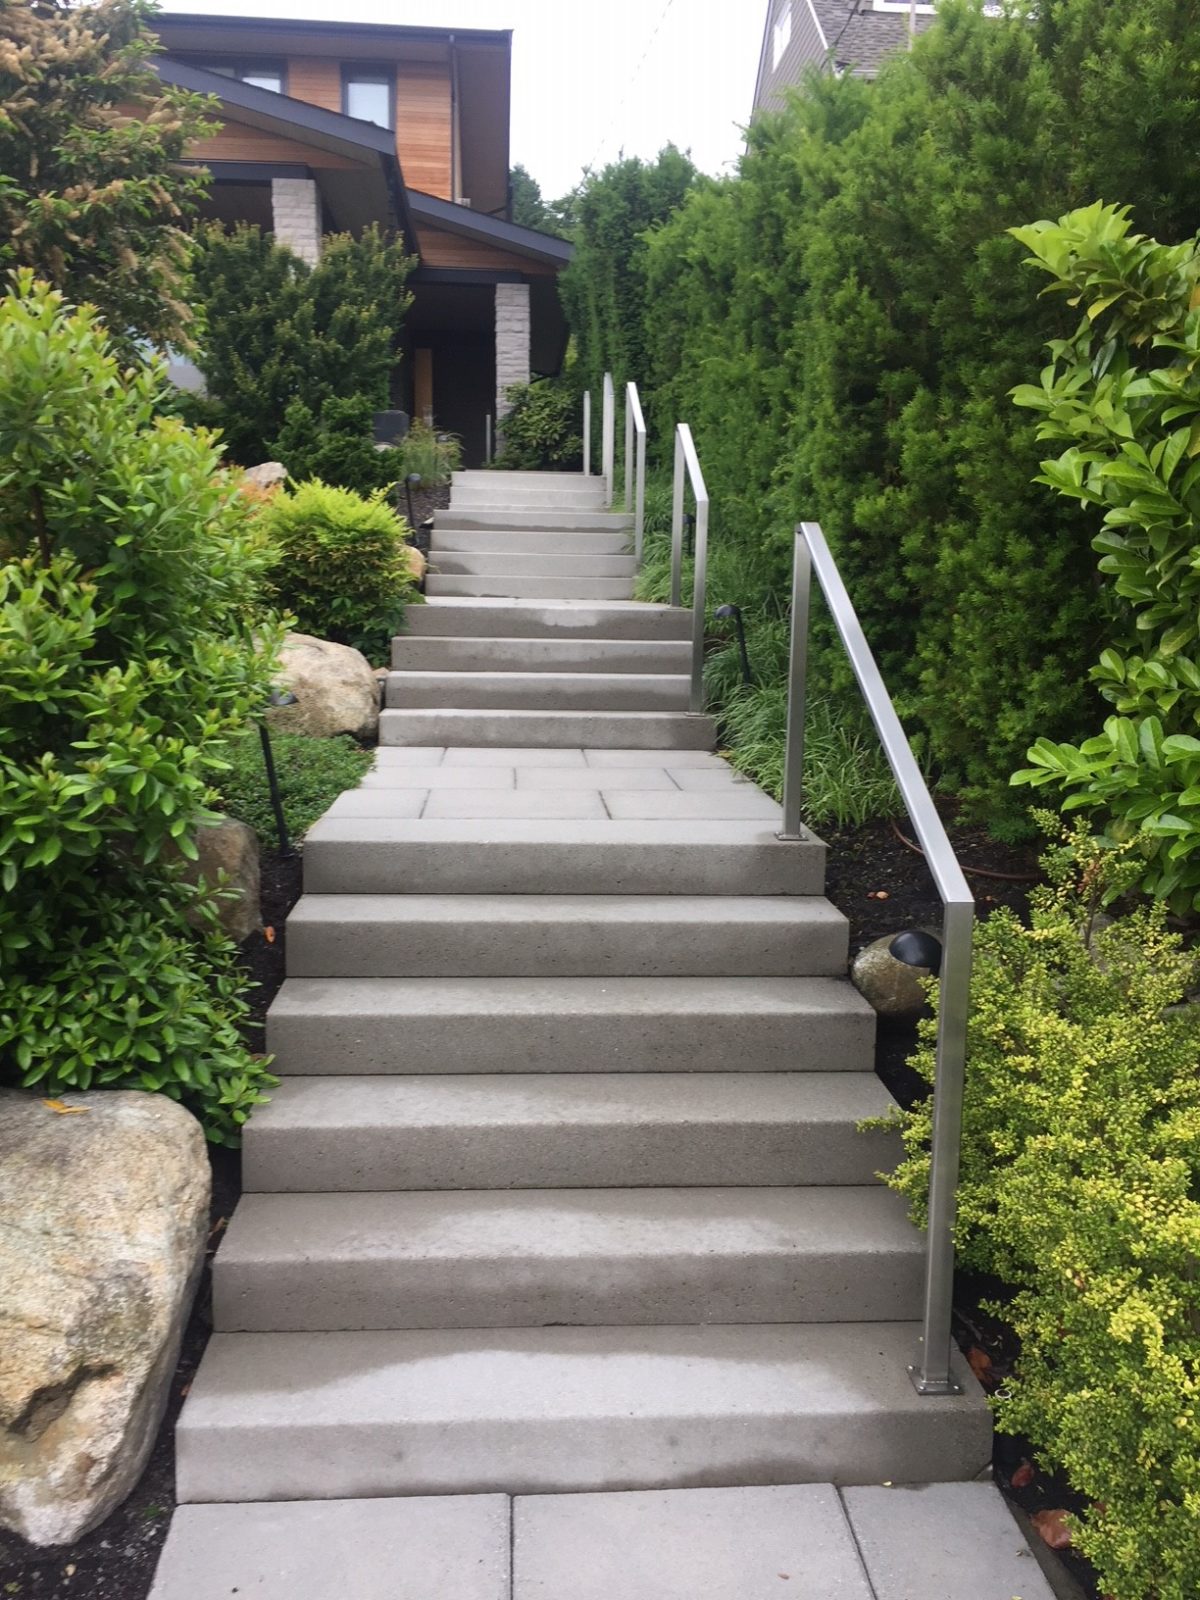 How to Construct Concrete Stairs?